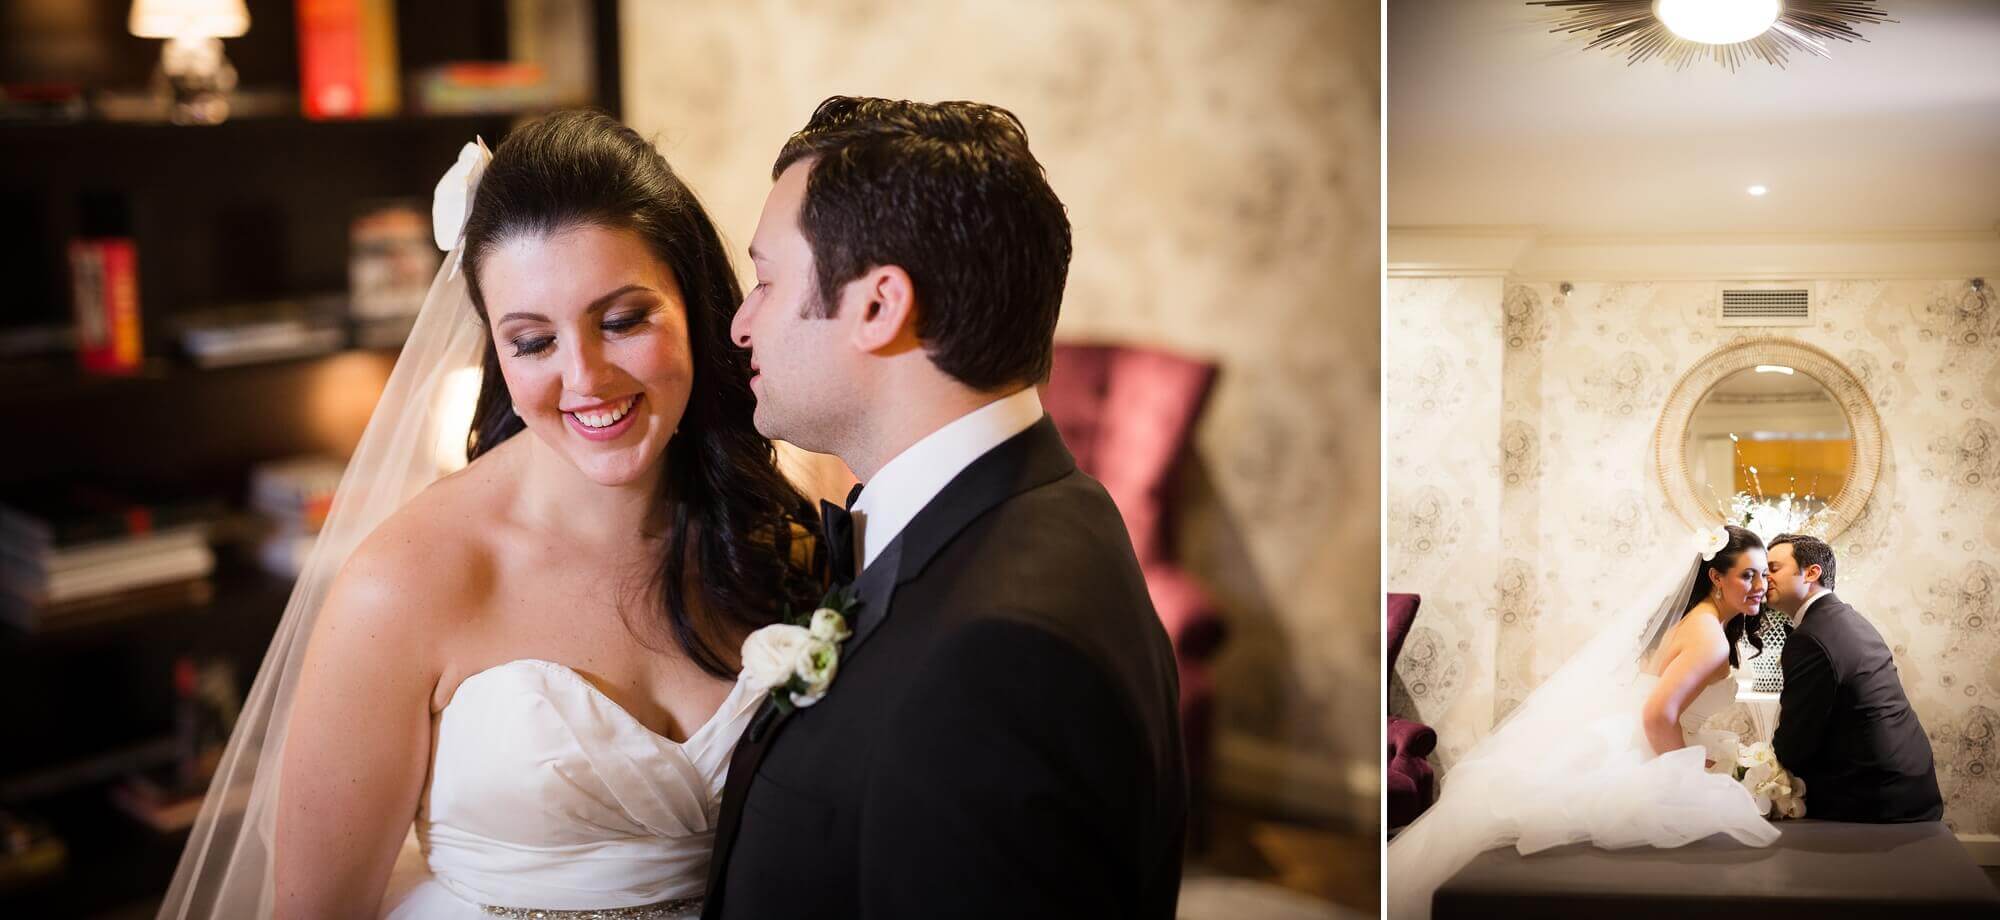 Portraits of the groom kissing his bride on the cheek at the Omni King Edward Hotel in Toronto